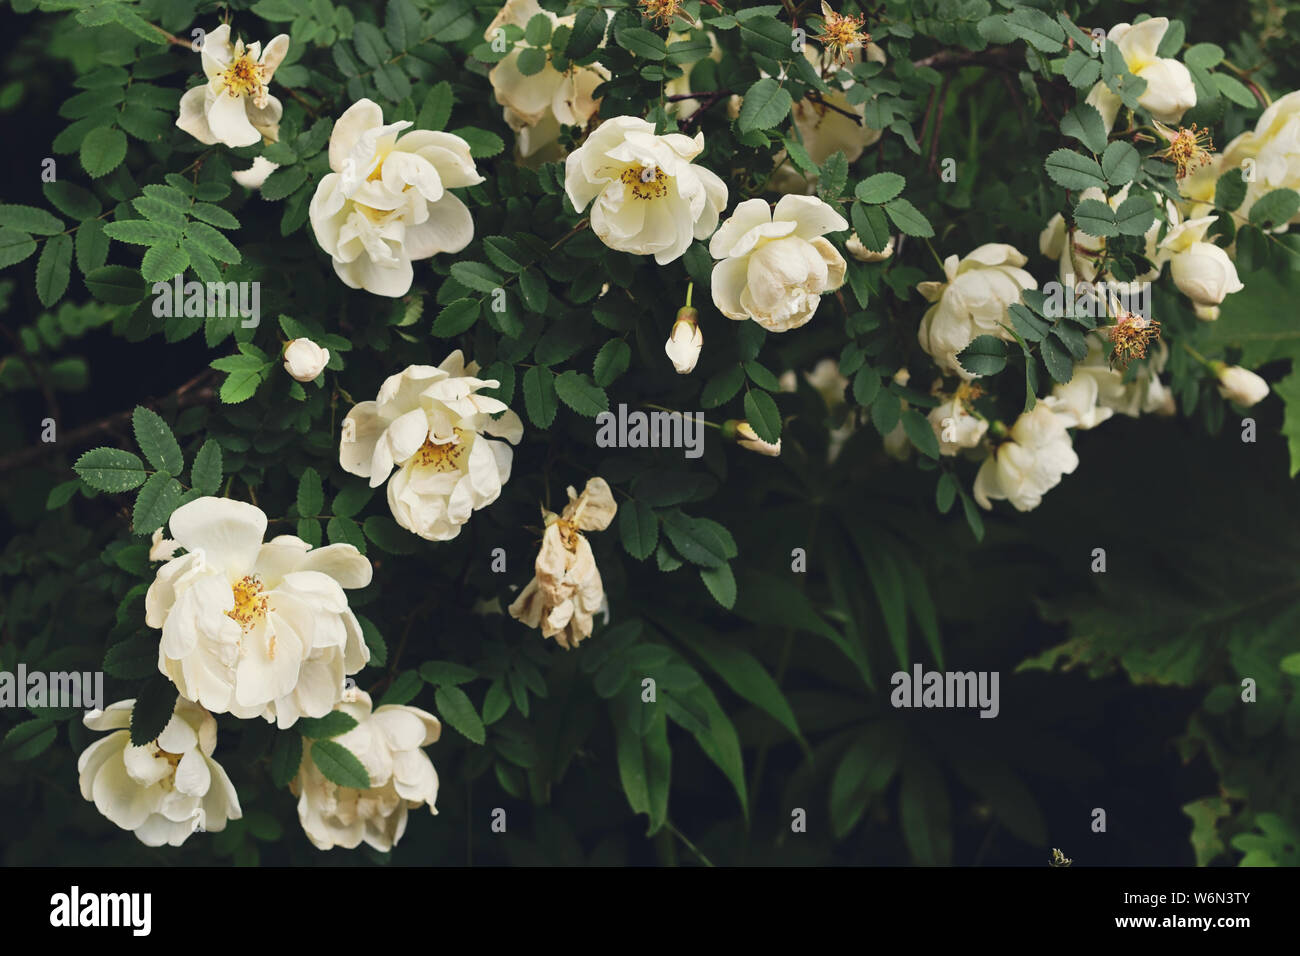 Bush of the white roses. The roses are blossoming Stock Photo